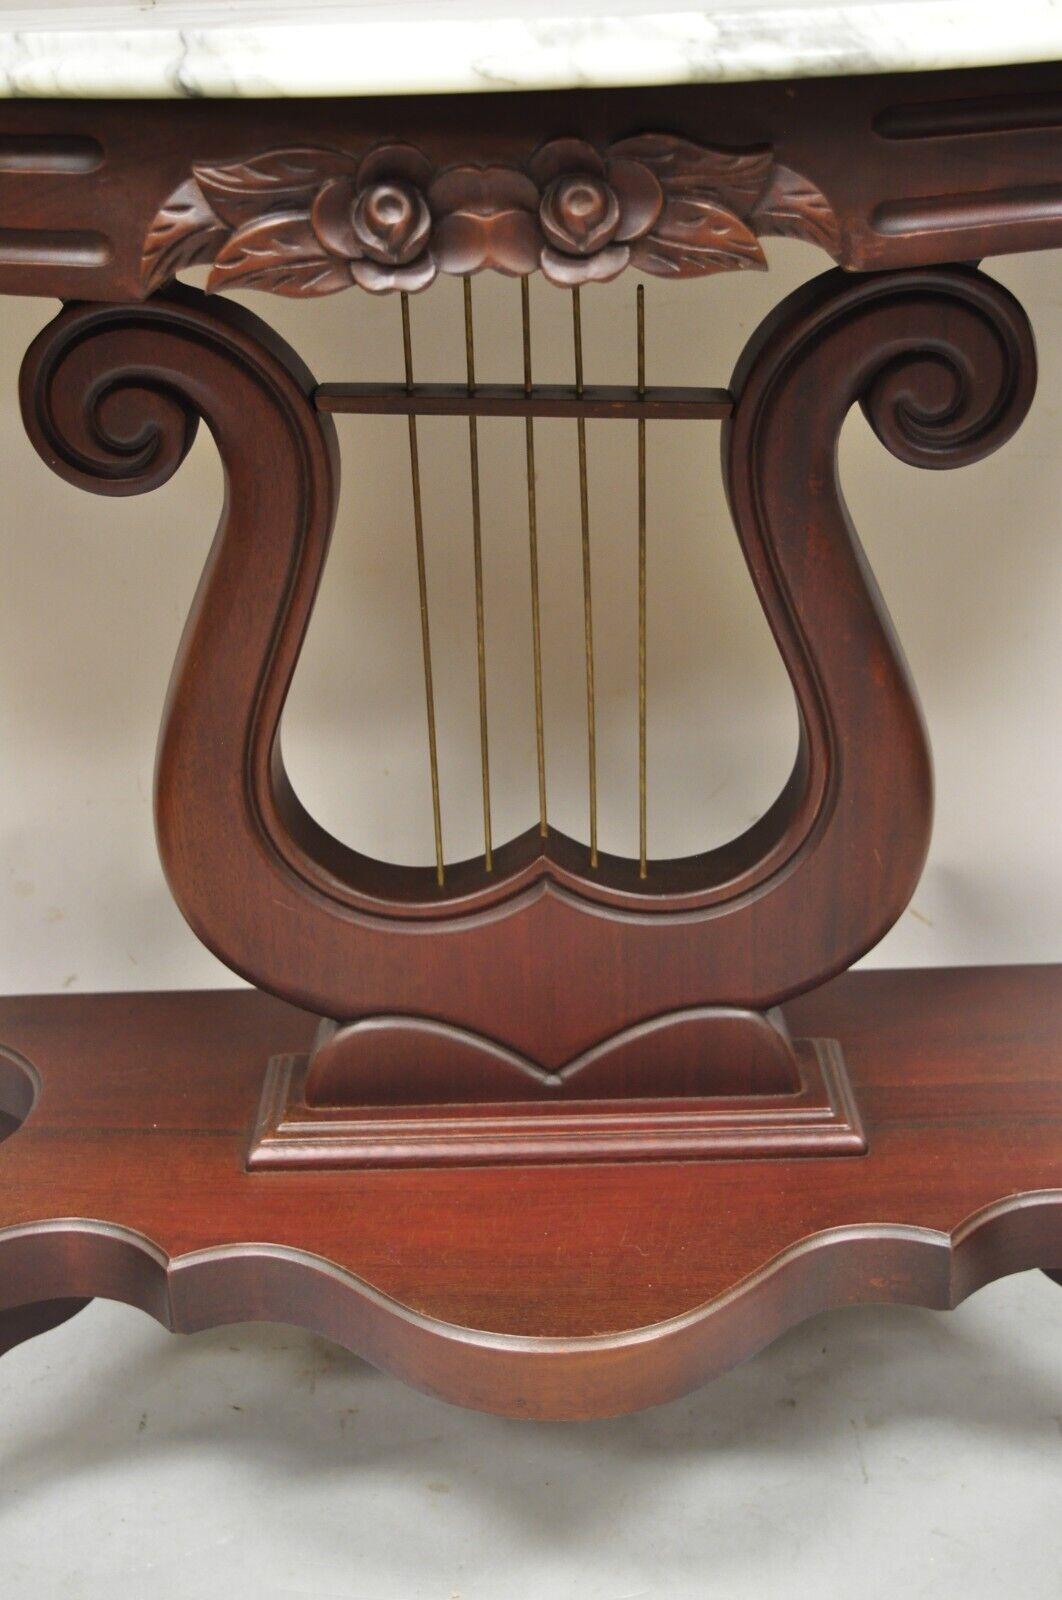 marble top harp table